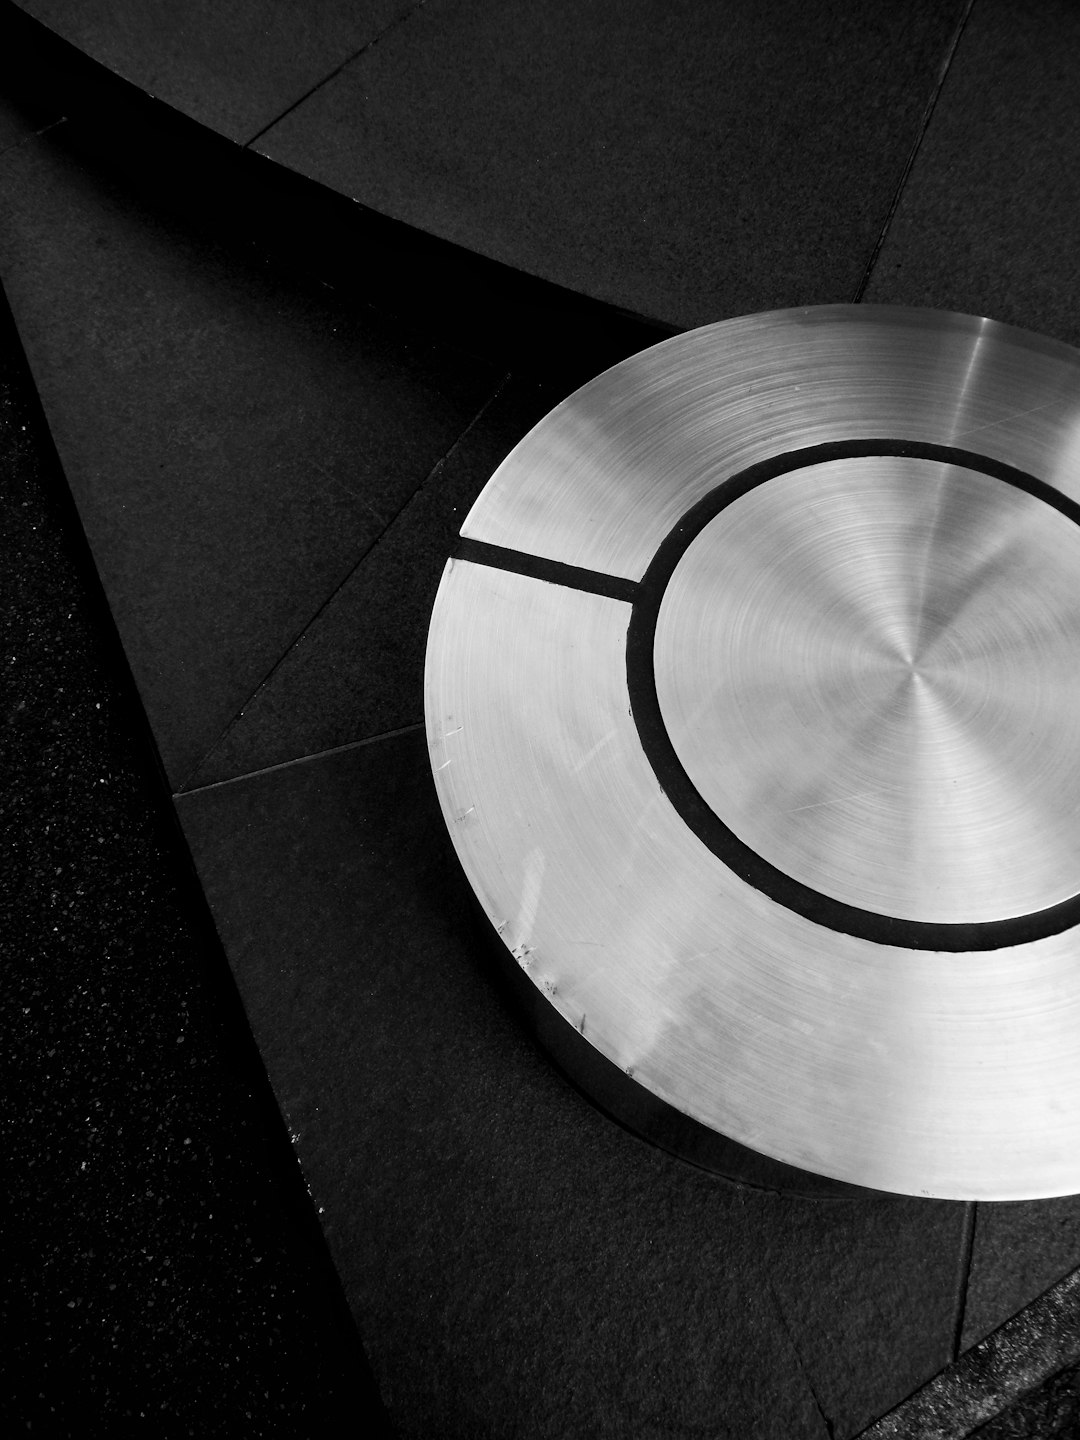 round stainless steel plate on black table